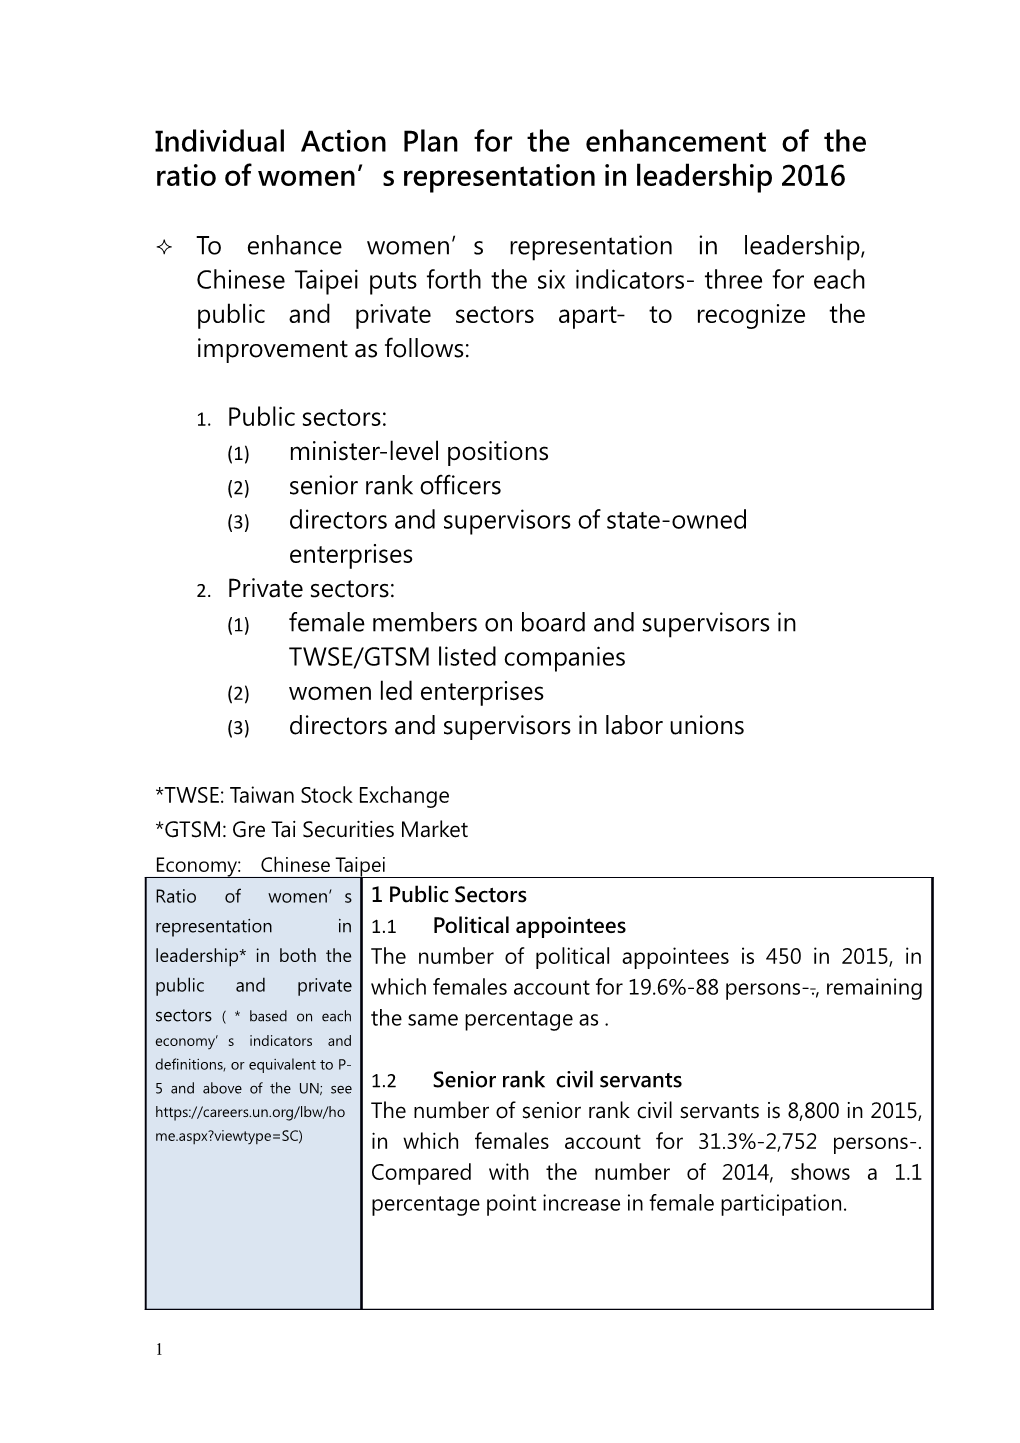 Individual Action Plan for the Enhancement Ofthe Ratio of Women S Representation in Leadership